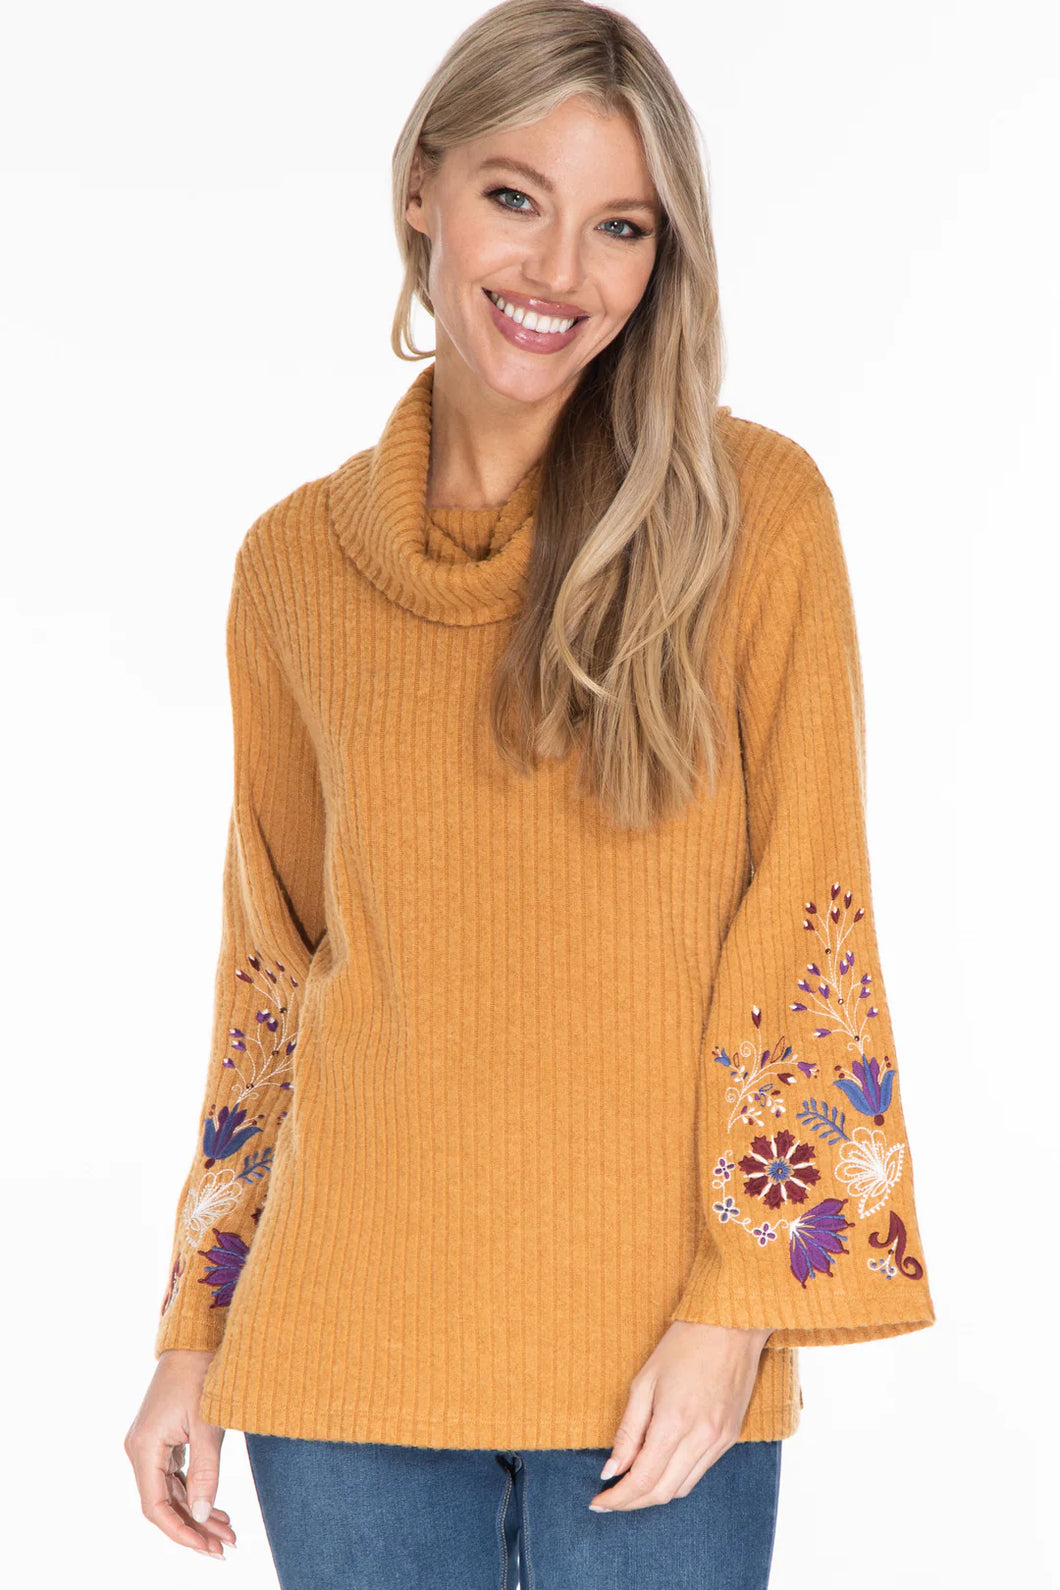 Multiples: Cowl Collar Embroidered Fuzzy Top in Rich Camel